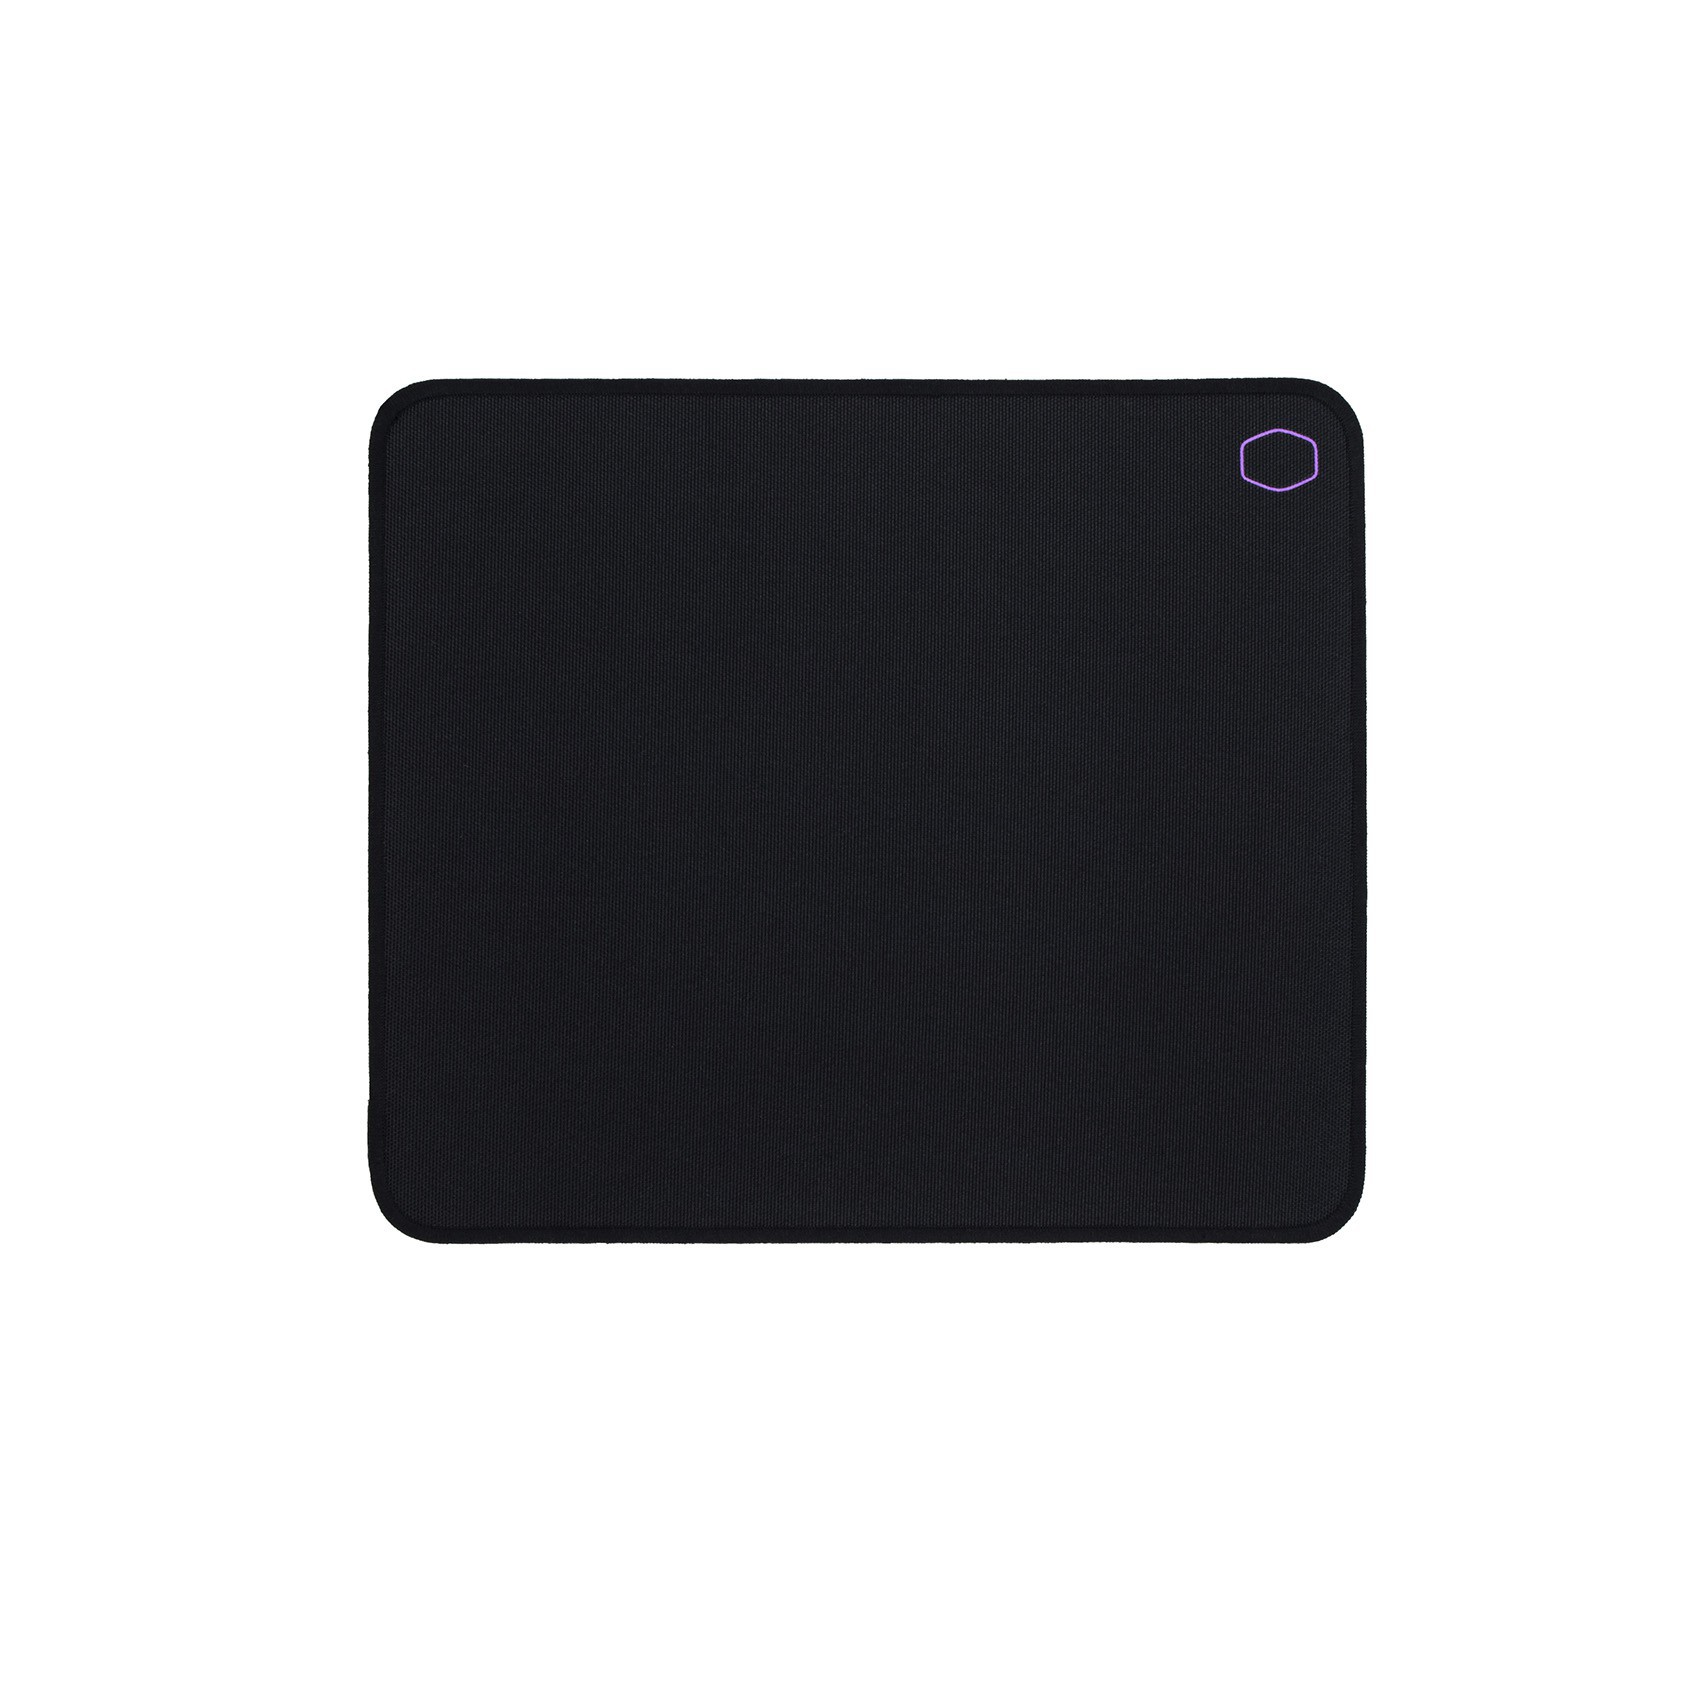 COOLER MASTER MASTERACCESSORY MP510 S BLACK 250X210MM MOUSE PAD